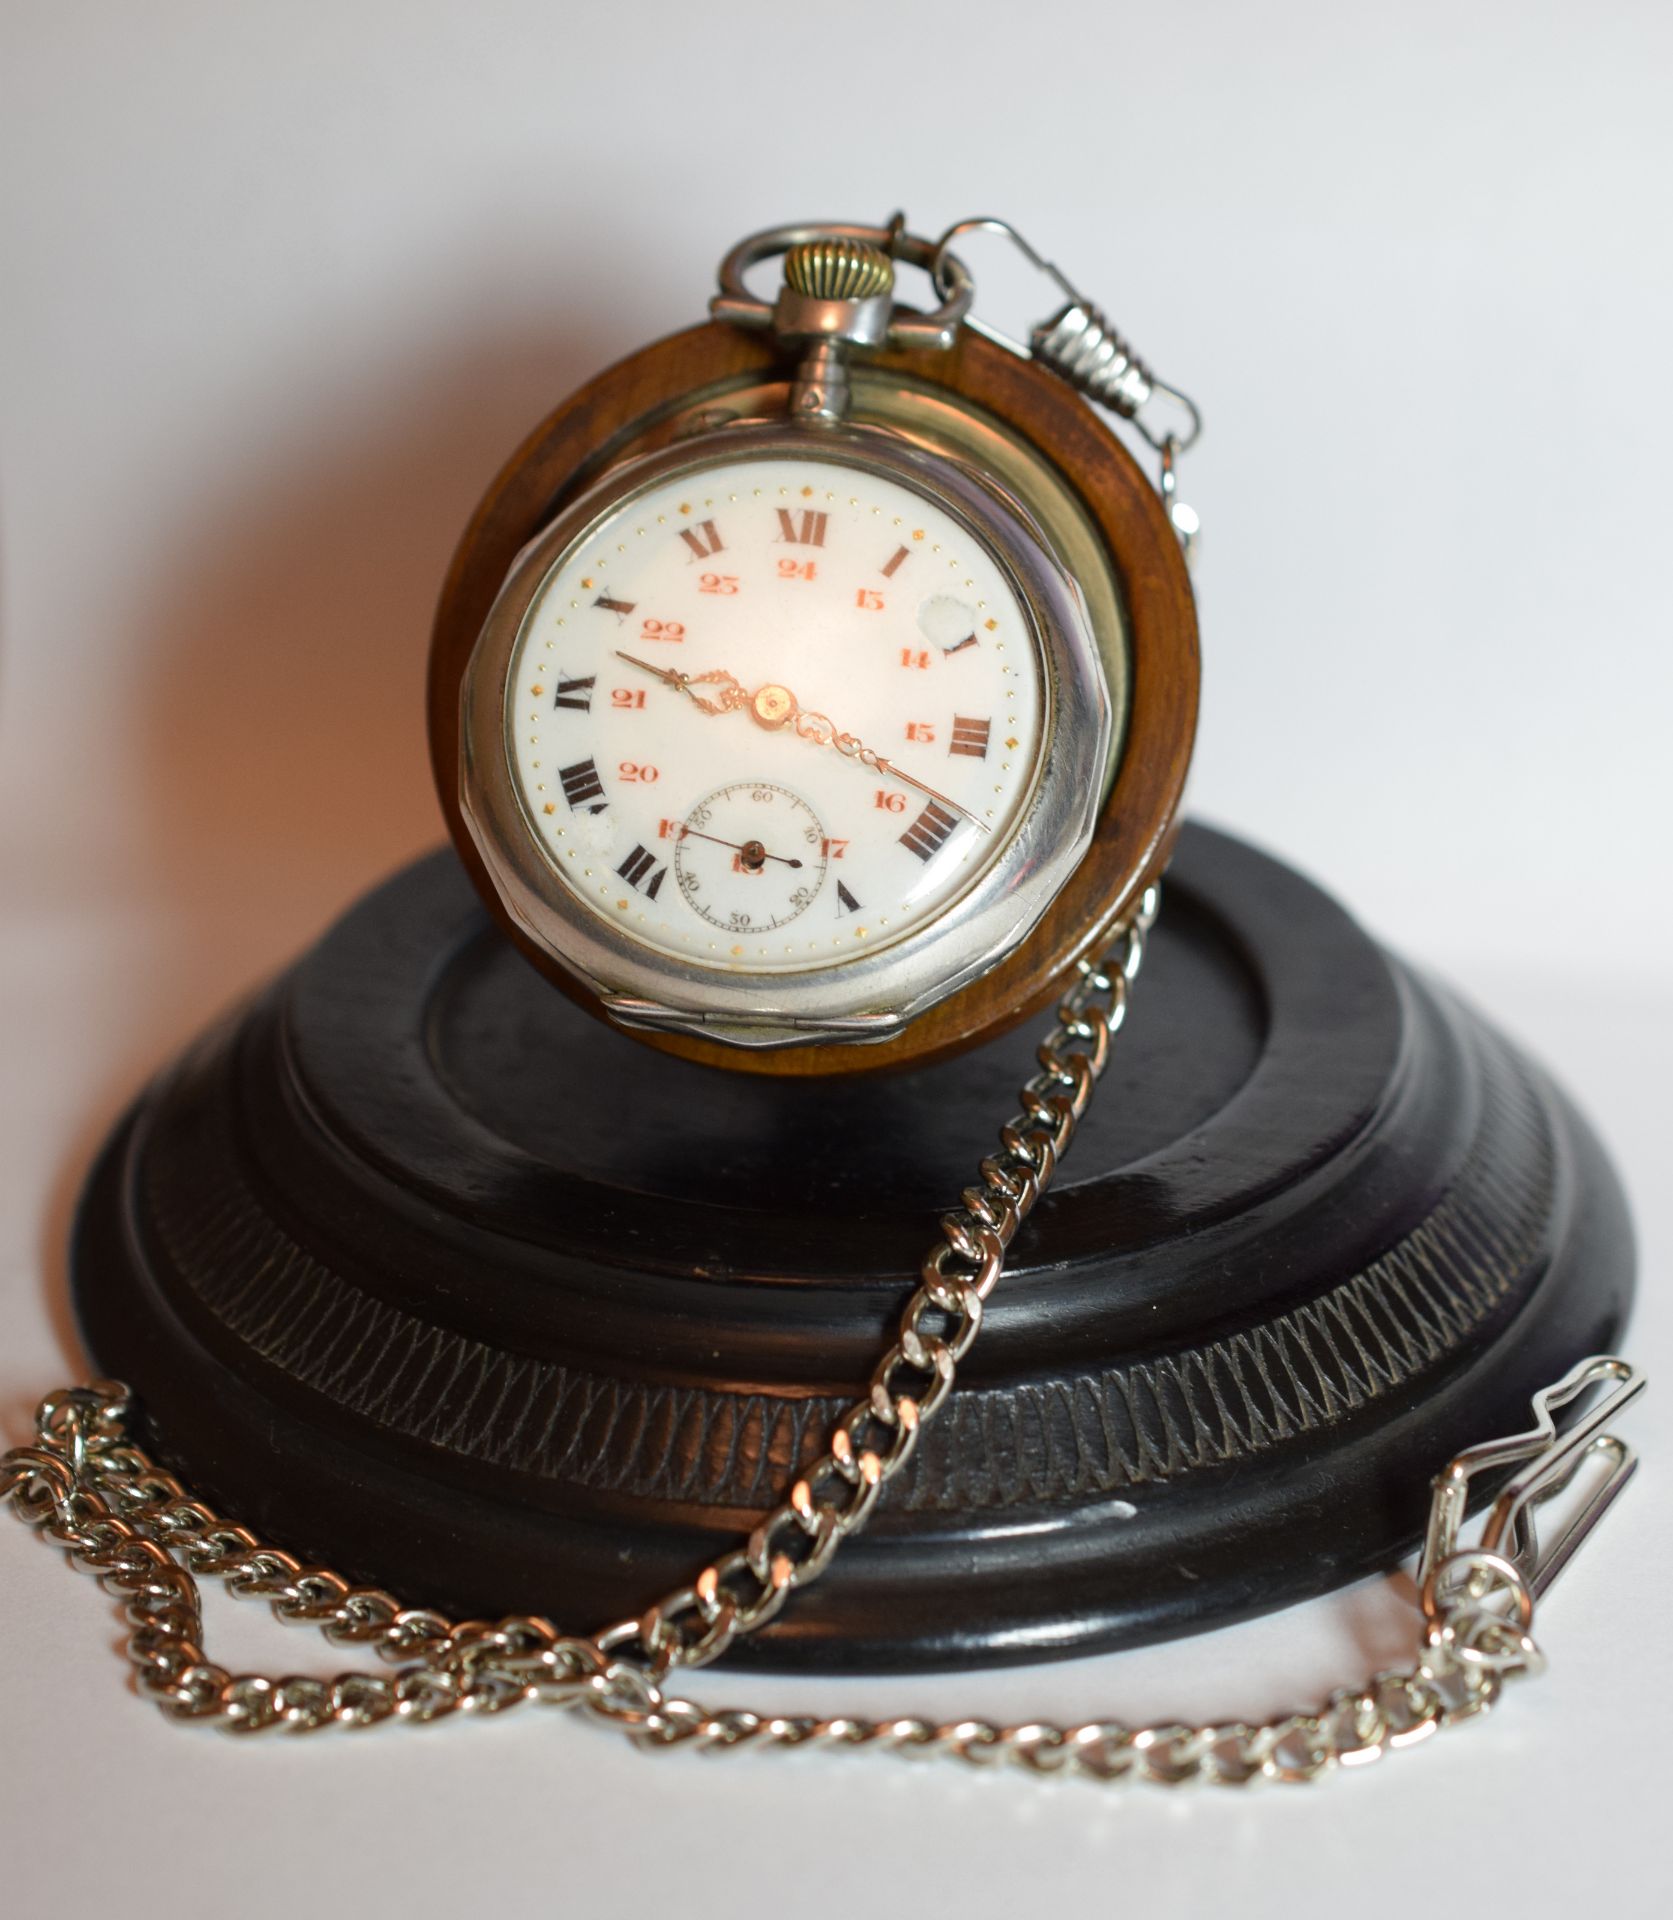 Silver Cased French Pocket Watch With Movement Signed C.Crettiez On Display Stand